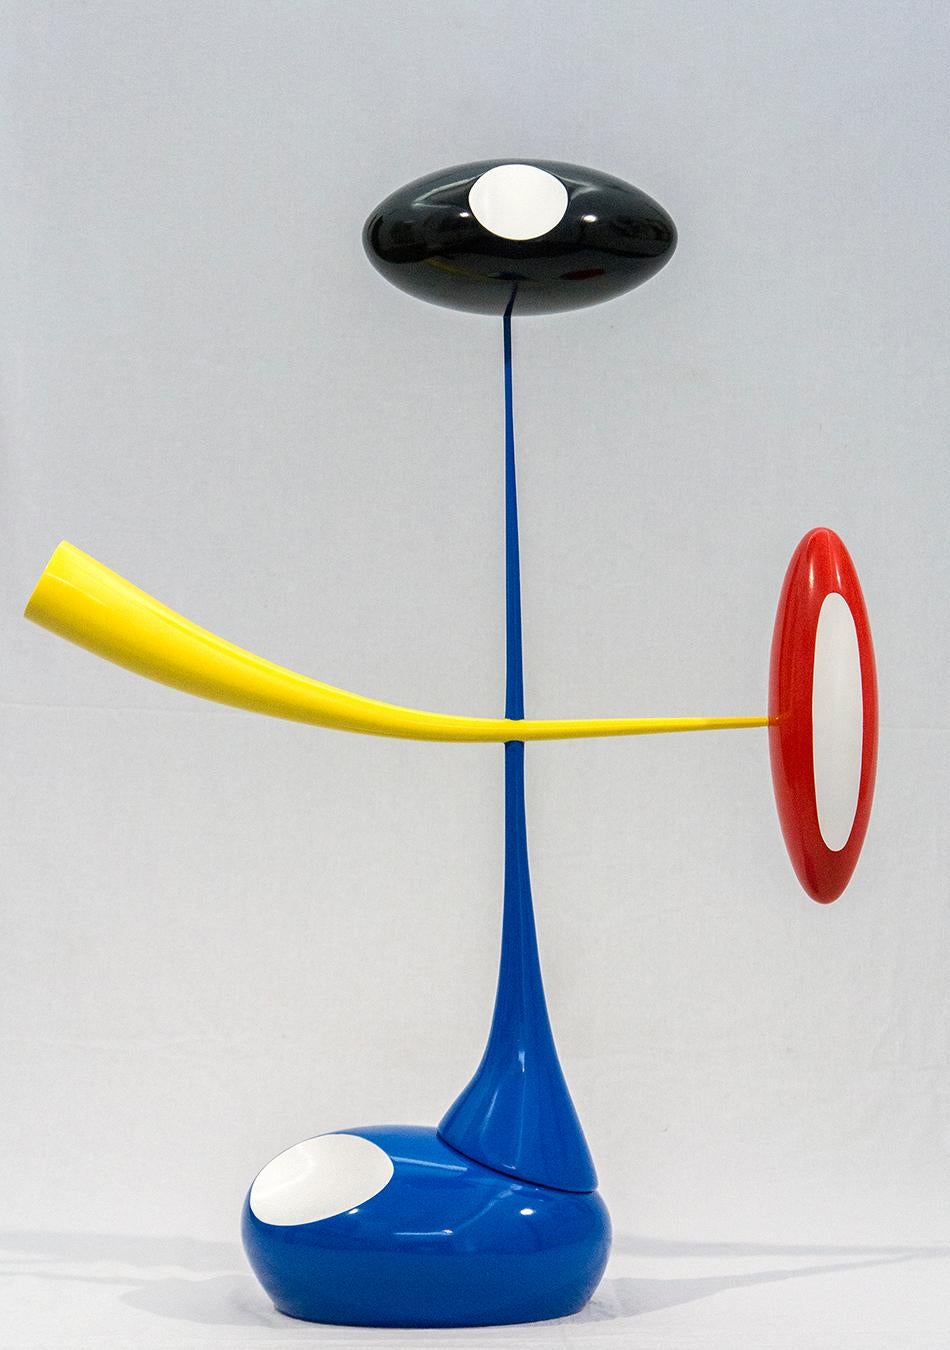 Benny Katz Abstract Sculpture - Performance - abstract interior red, blue, yellow and black playful sculpture